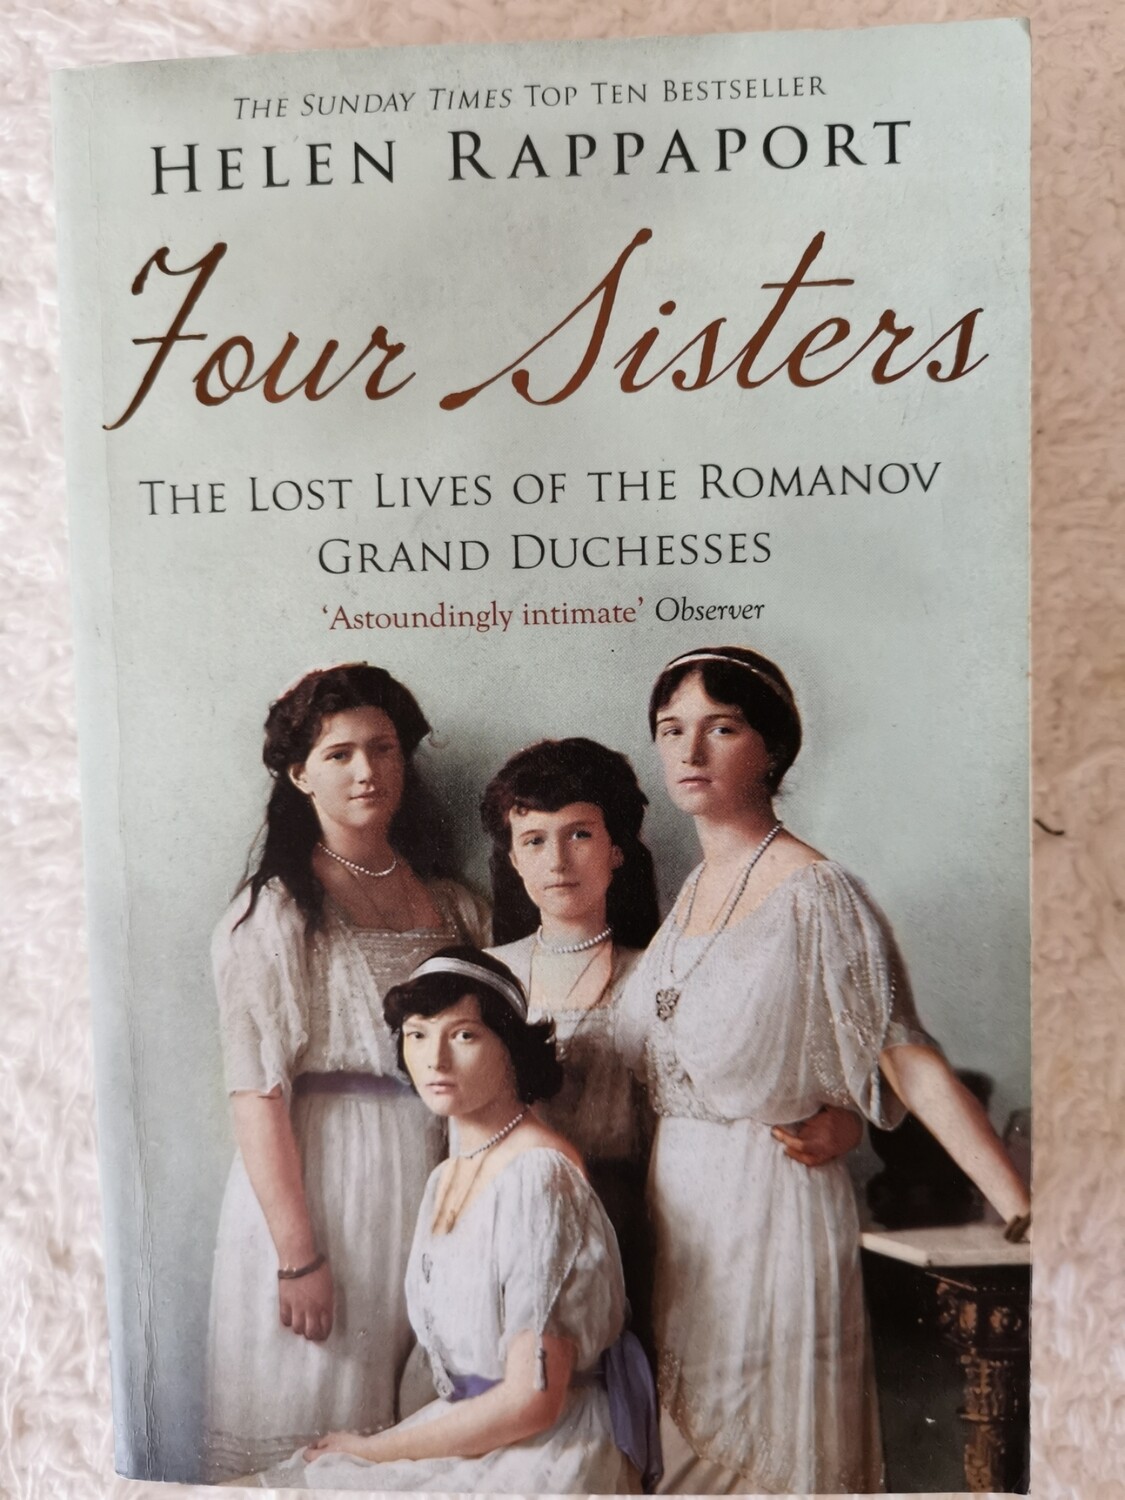 Four sisters, Helen Rappaport